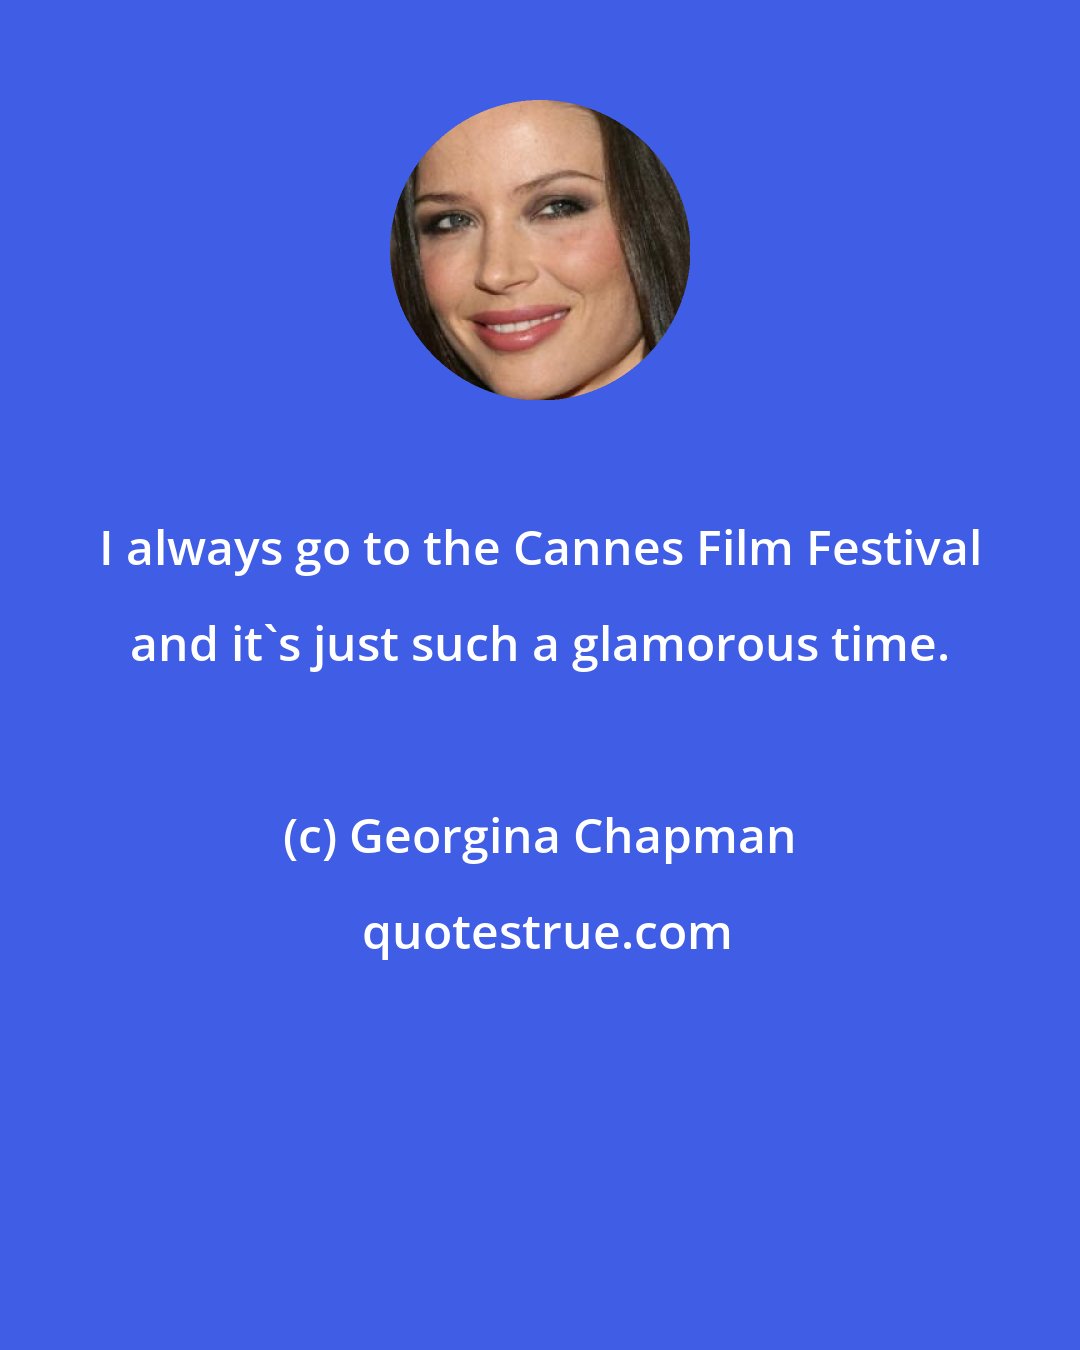 Georgina Chapman: I always go to the Cannes Film Festival and it's just such a glamorous time.